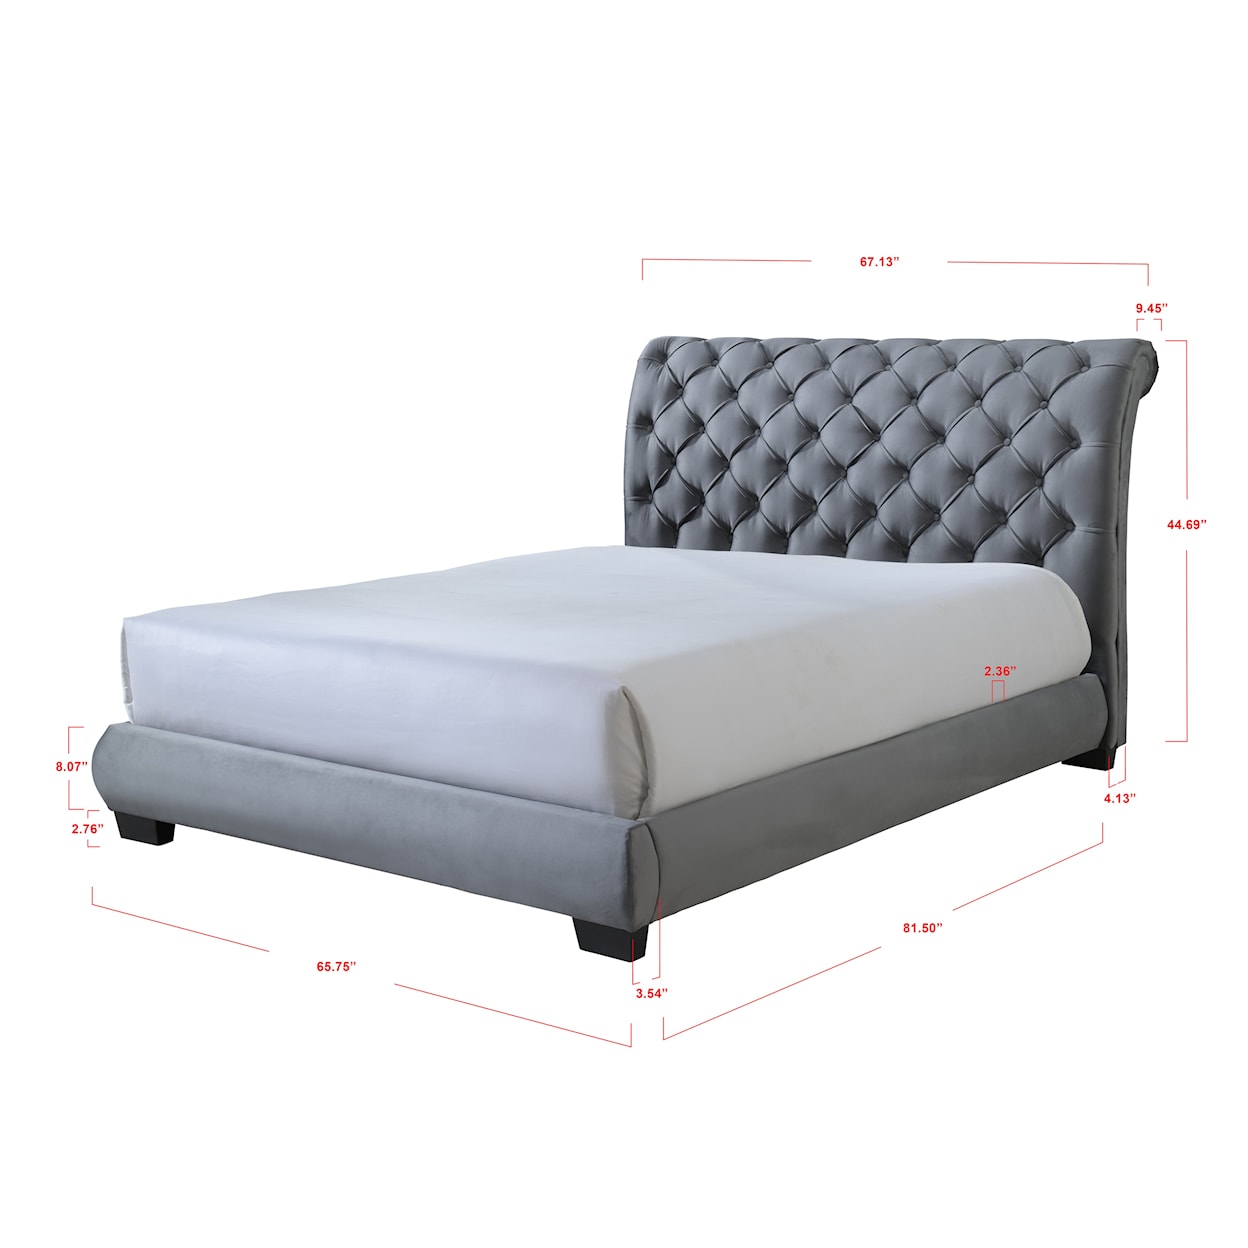 CM Carly Upholstered Queen Sleigh Bed